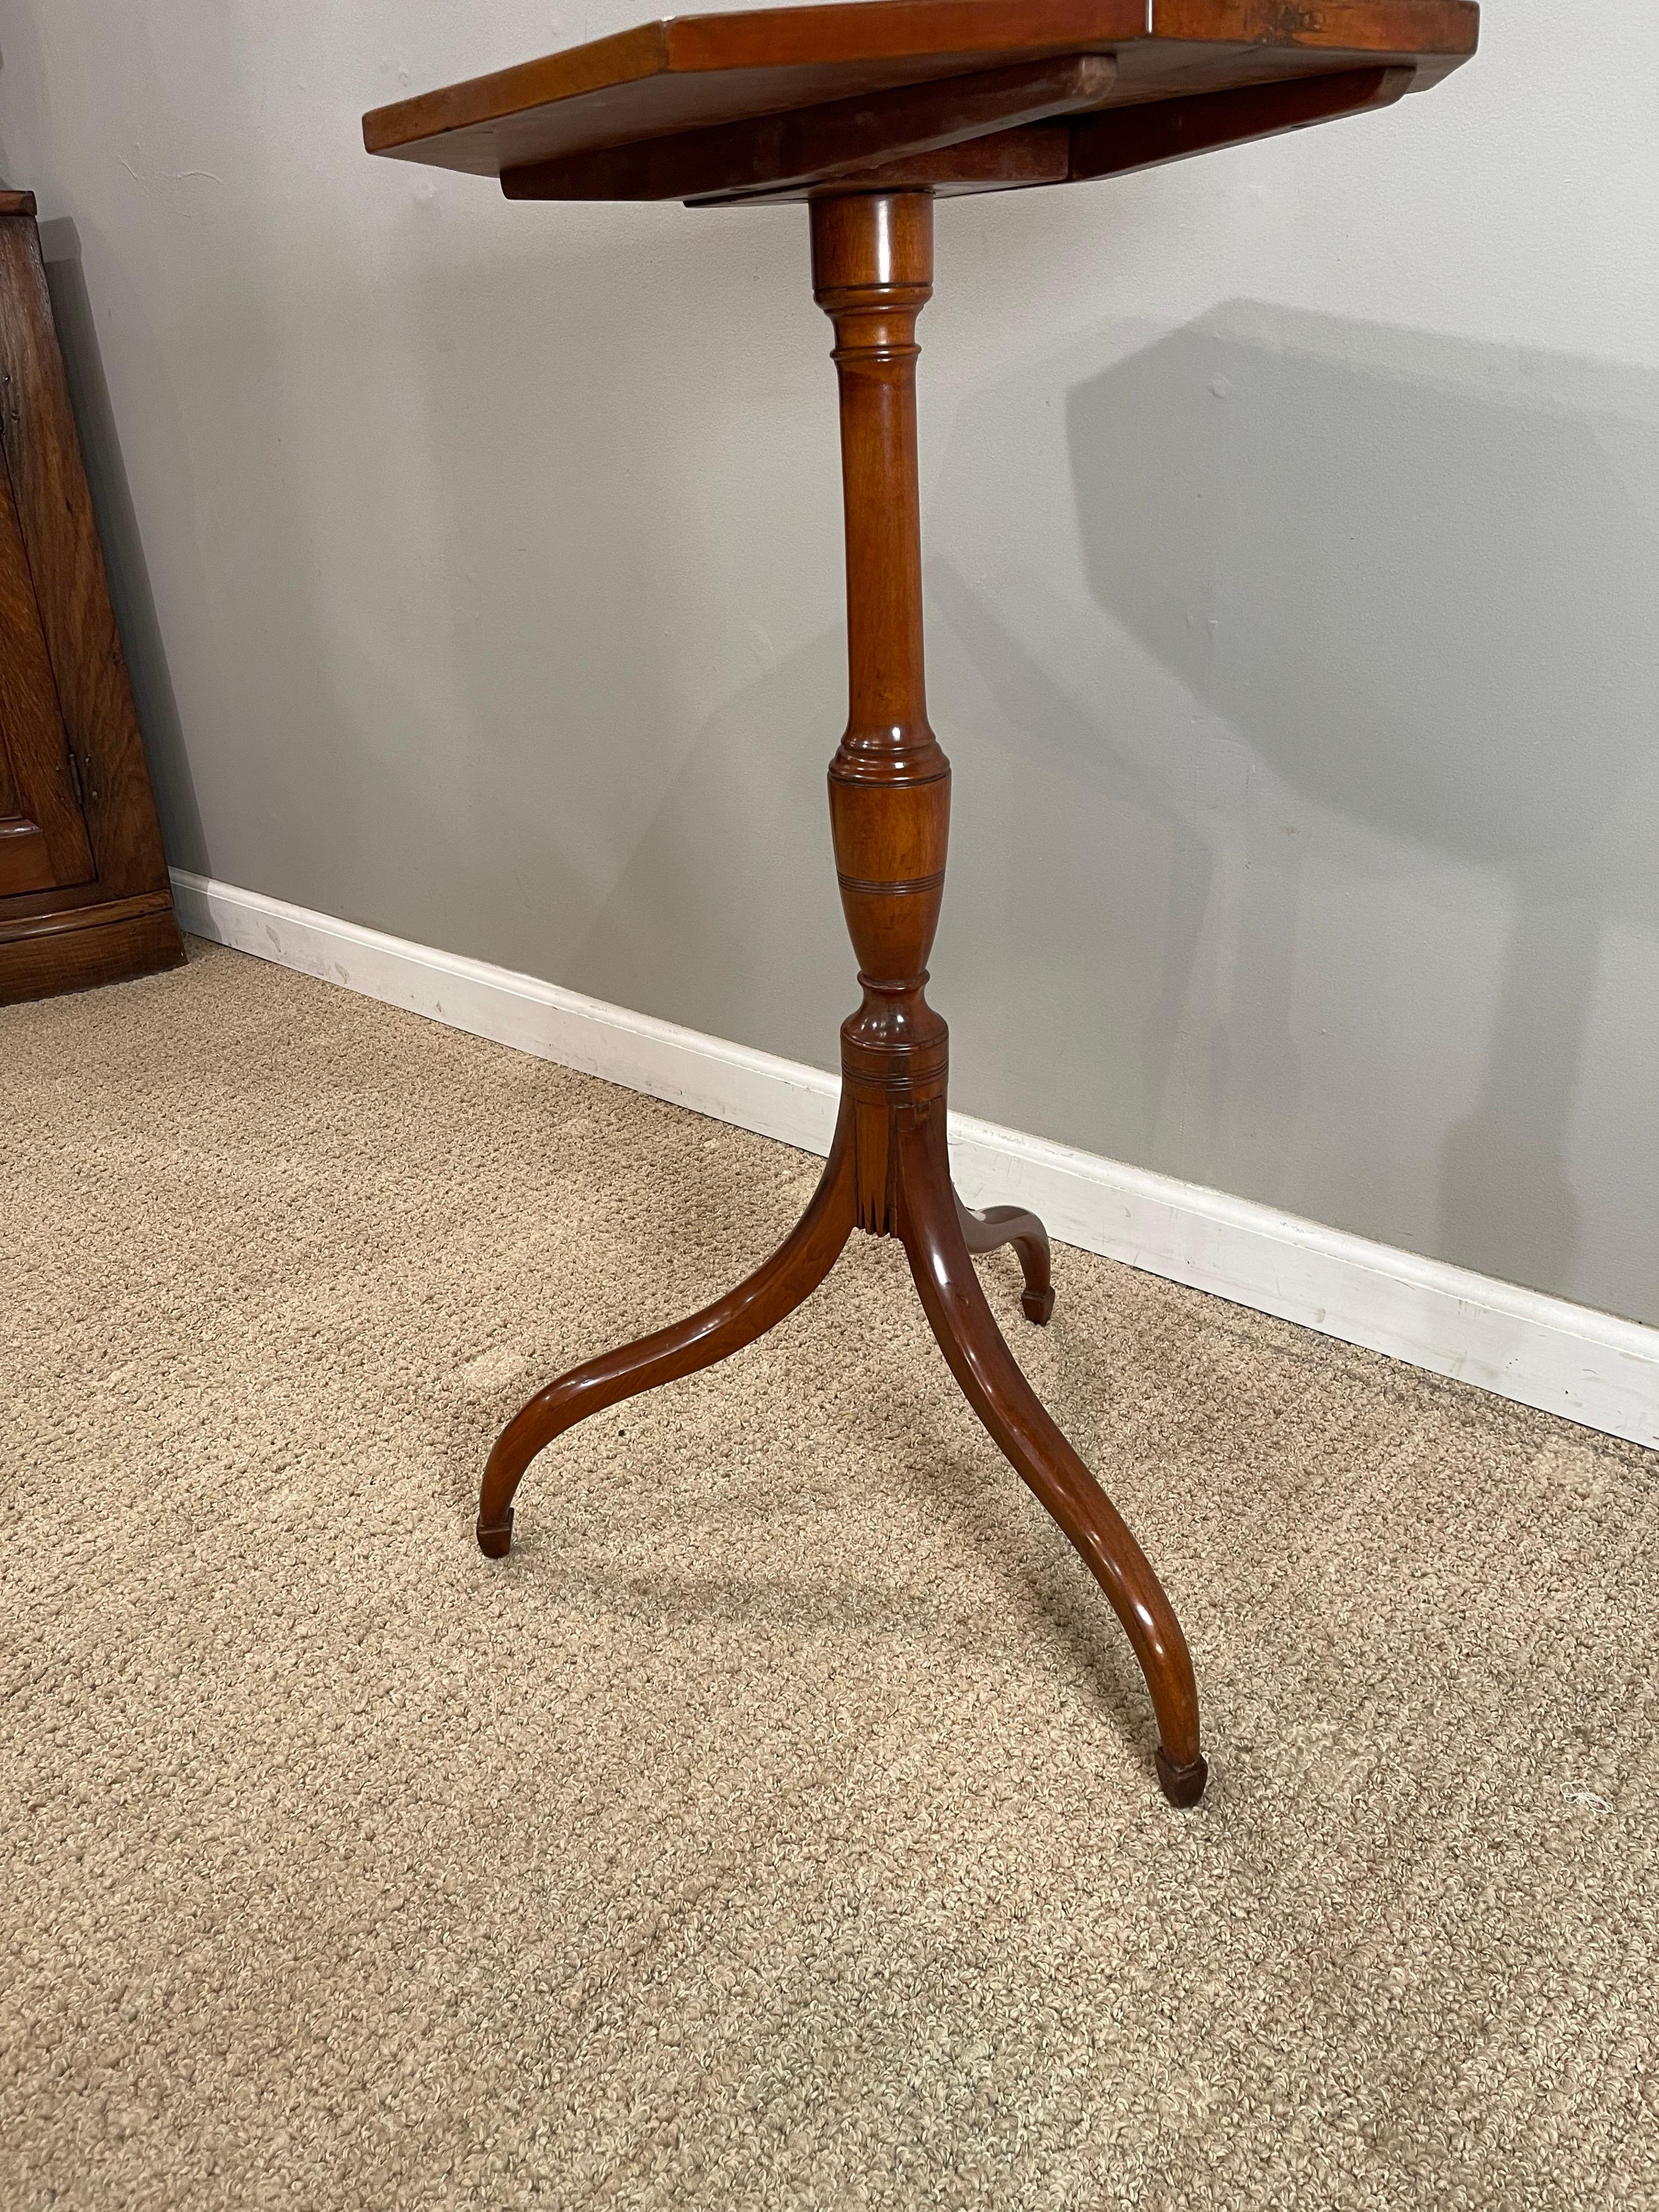 Federal Tiger Maple Tripod Table, American, Early 19th Century For Sale 9